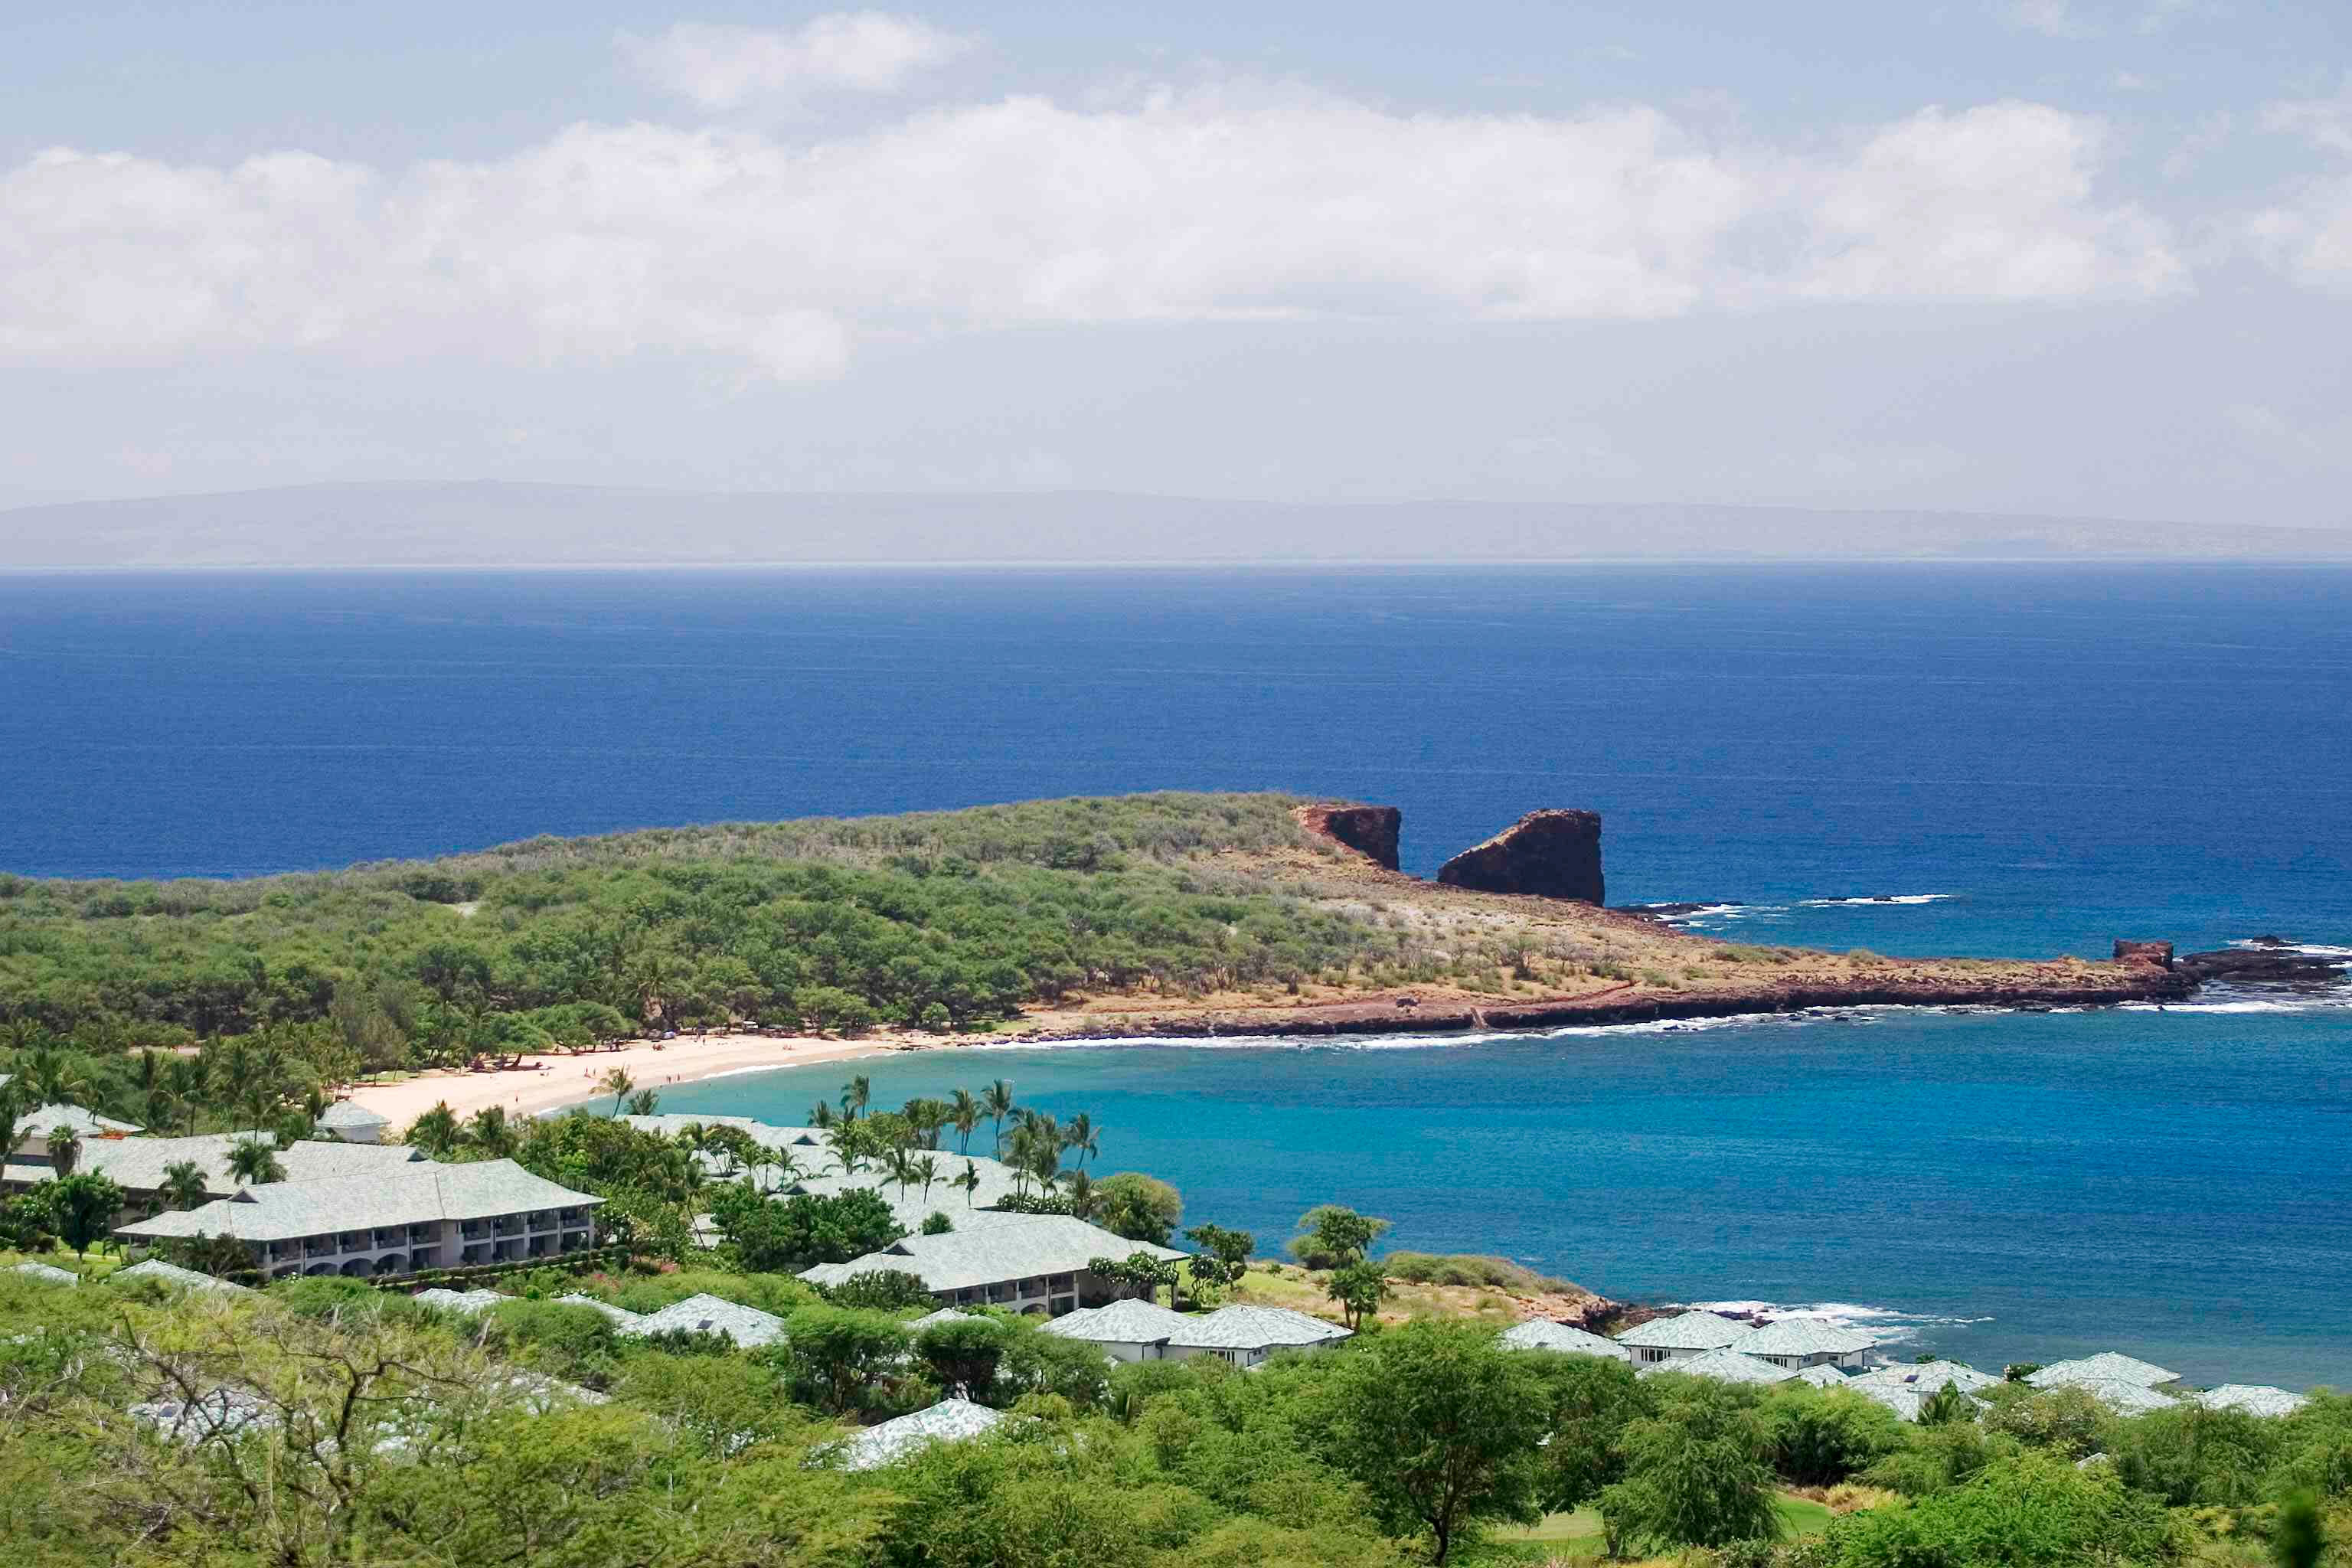 A Trilogoy adventure from Manele Bay north on Lanai